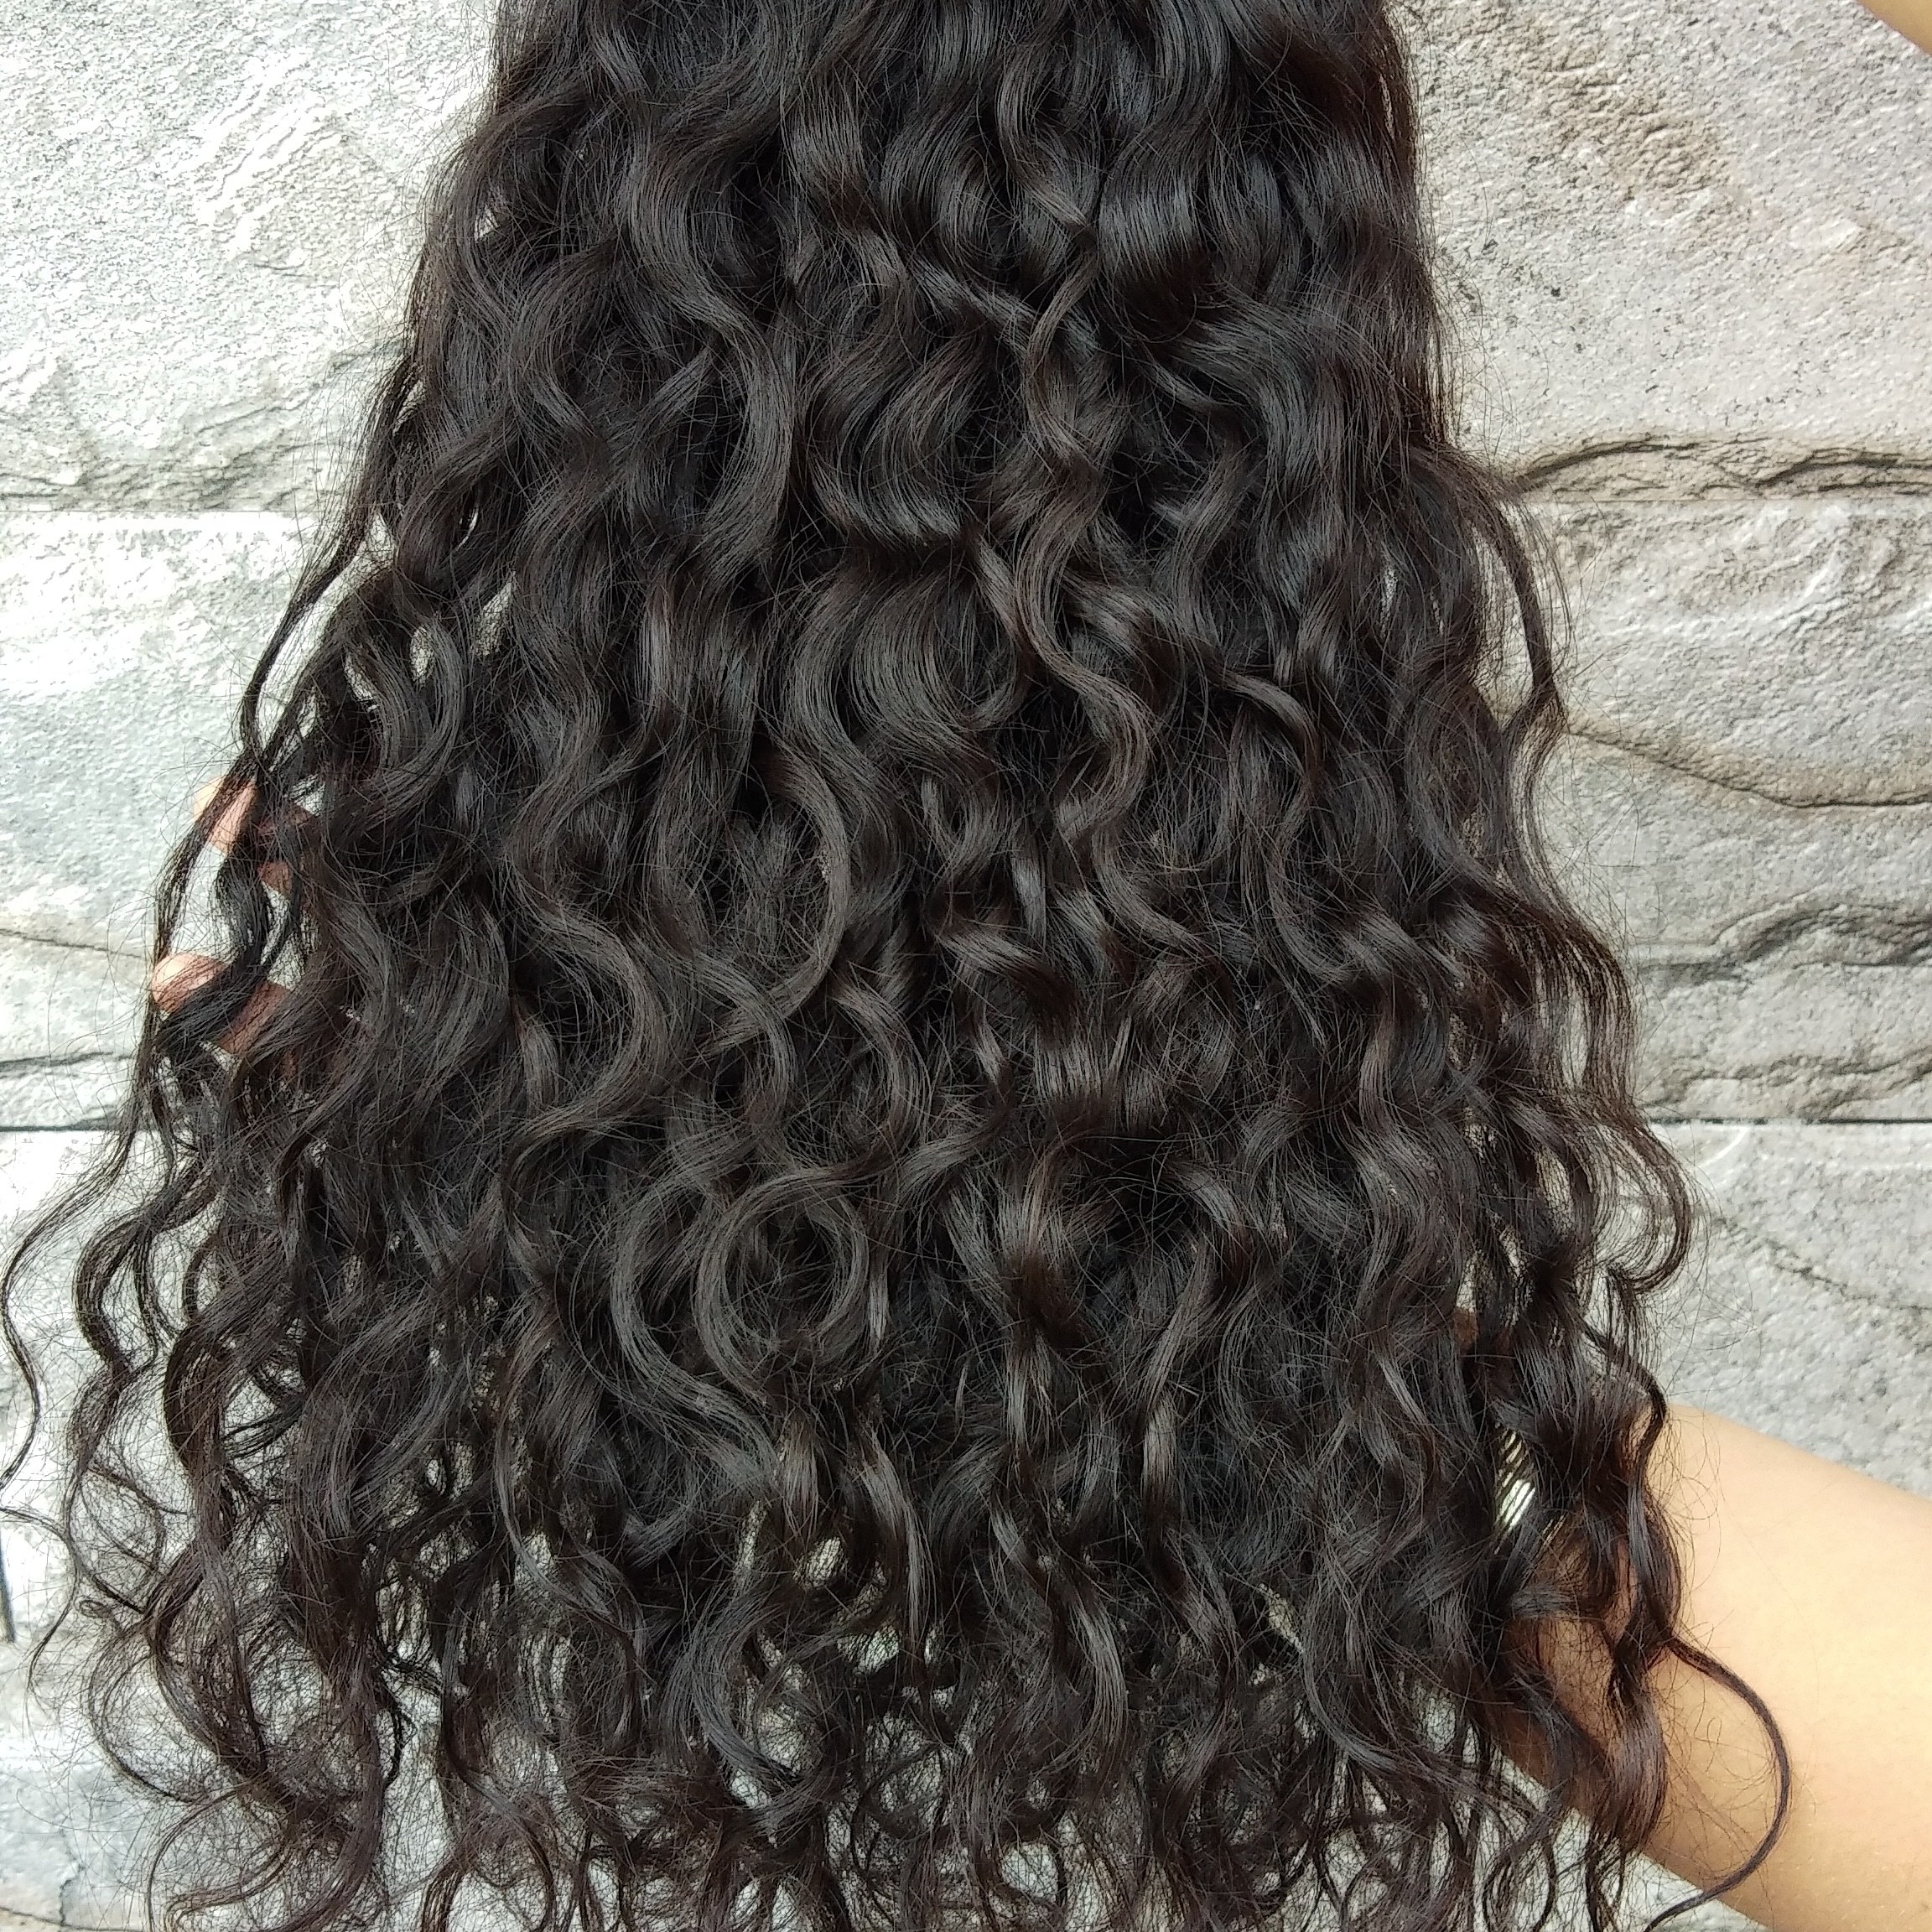 Indian Temple Soft Curly Raw Human Hair